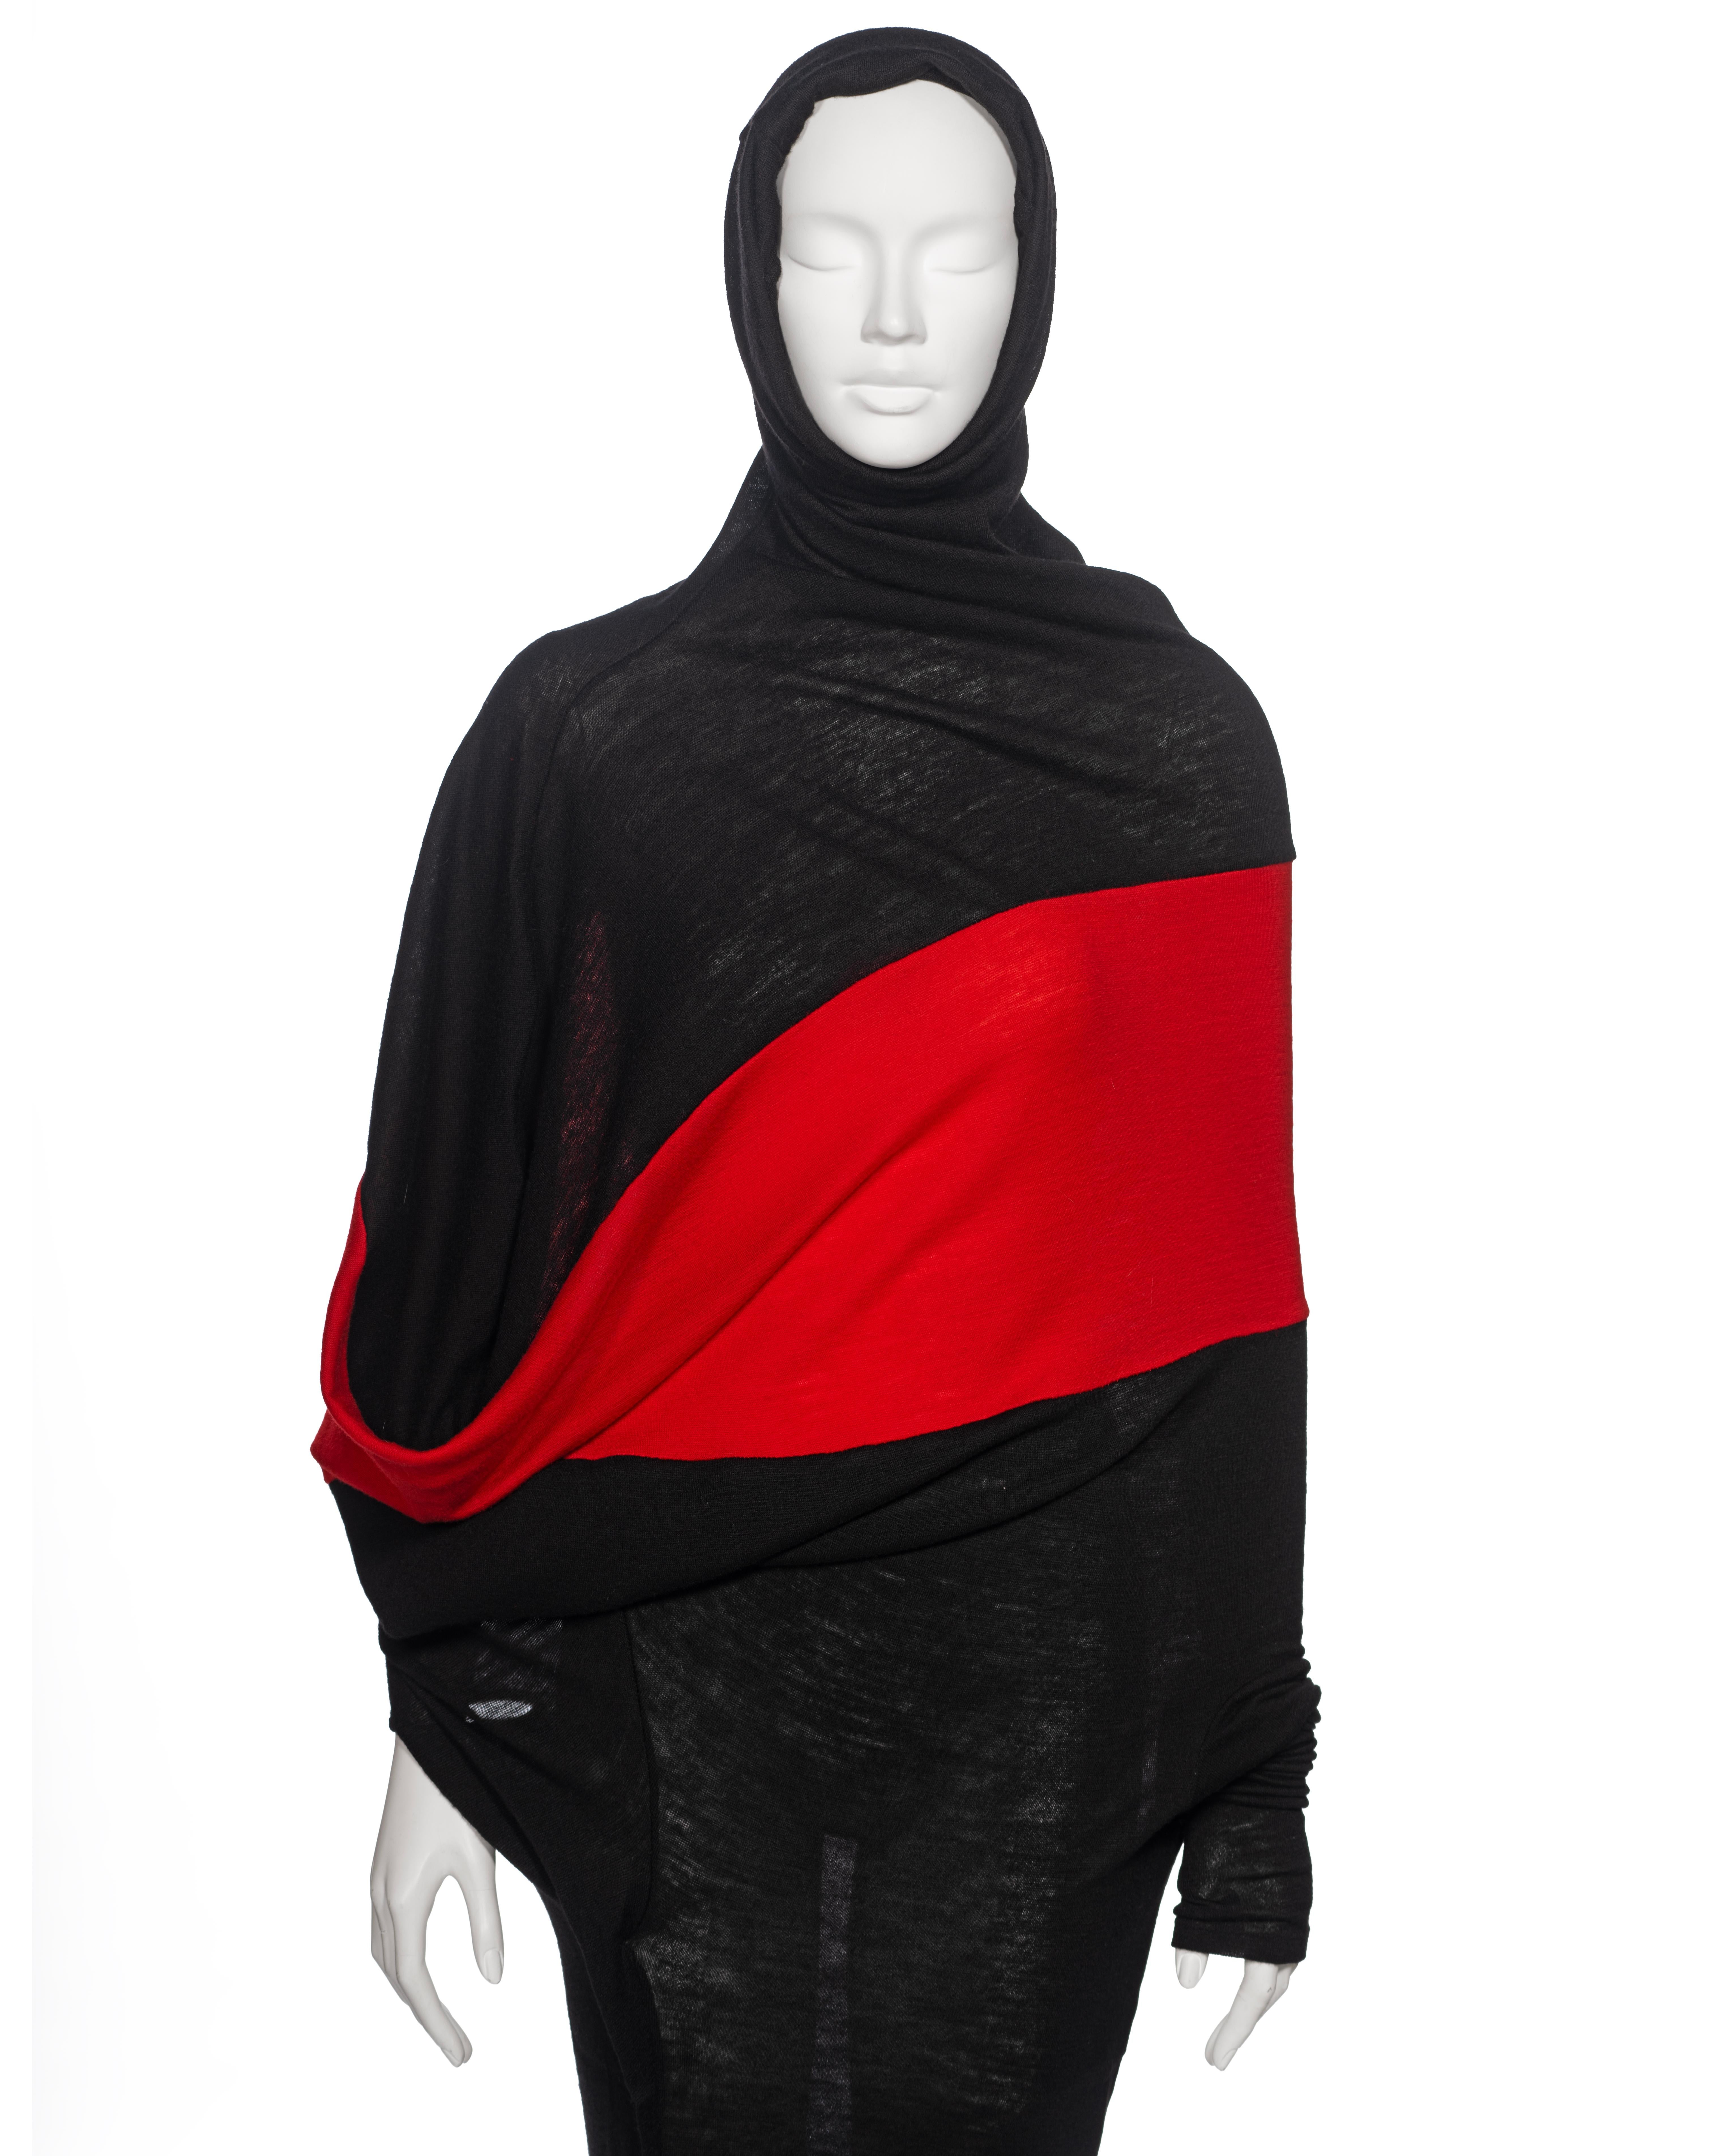 Yohji Yamamoto Black and Red Wool Asymmetric Convertible Maxi Dress, fw 2012 In Excellent Condition For Sale In London, GB